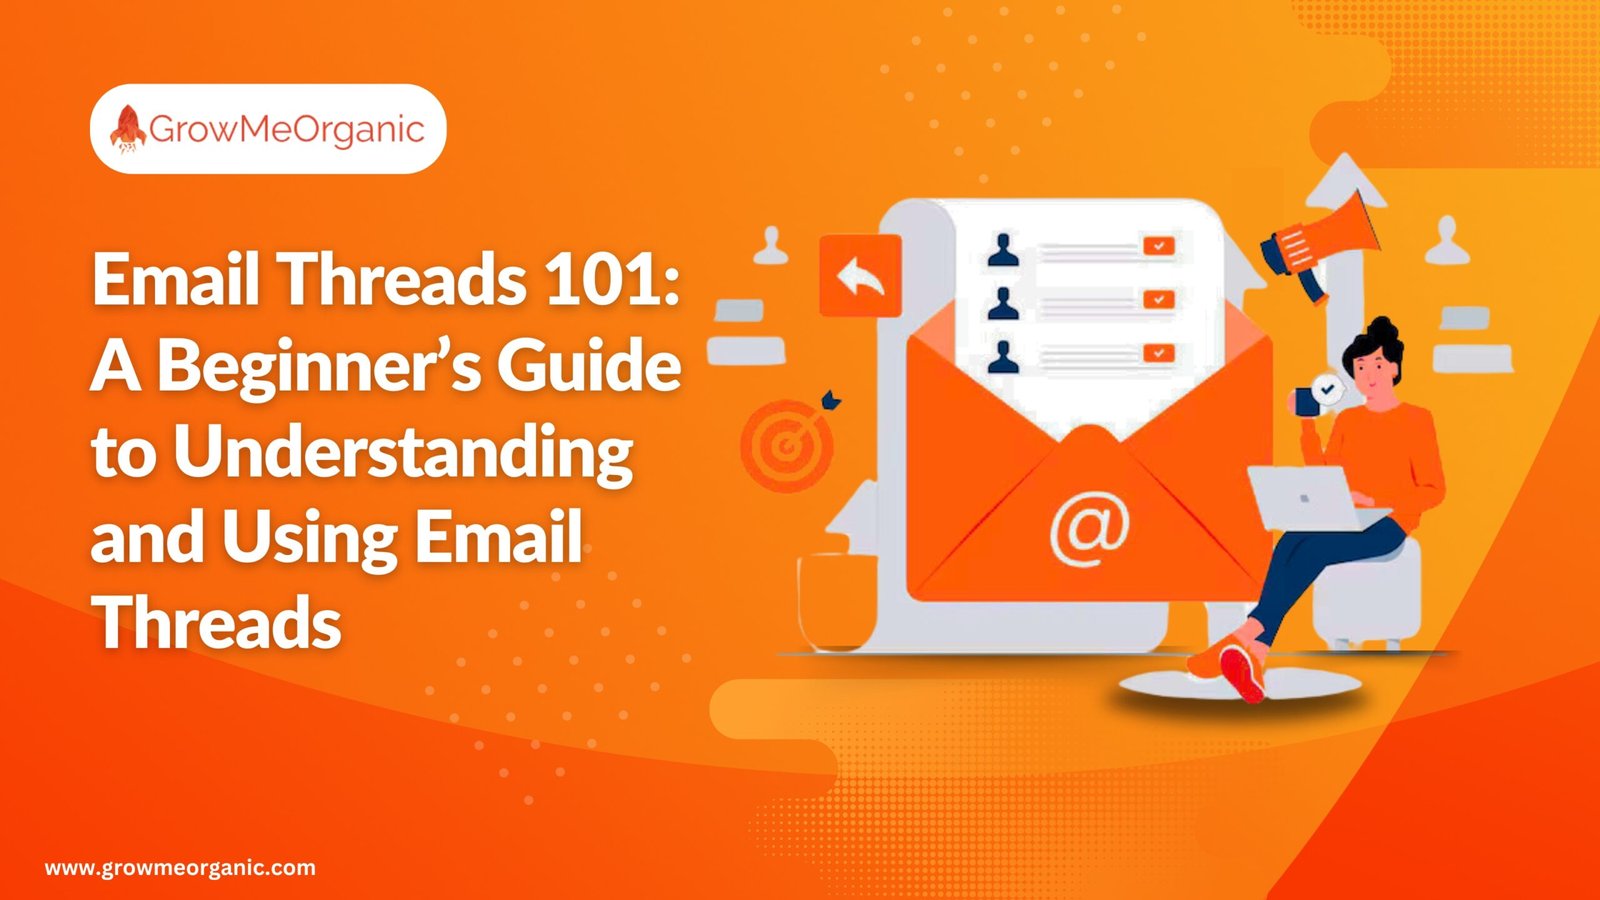 Email Threads 101: A Beginner's Guide to Understanding and Using Email Threads